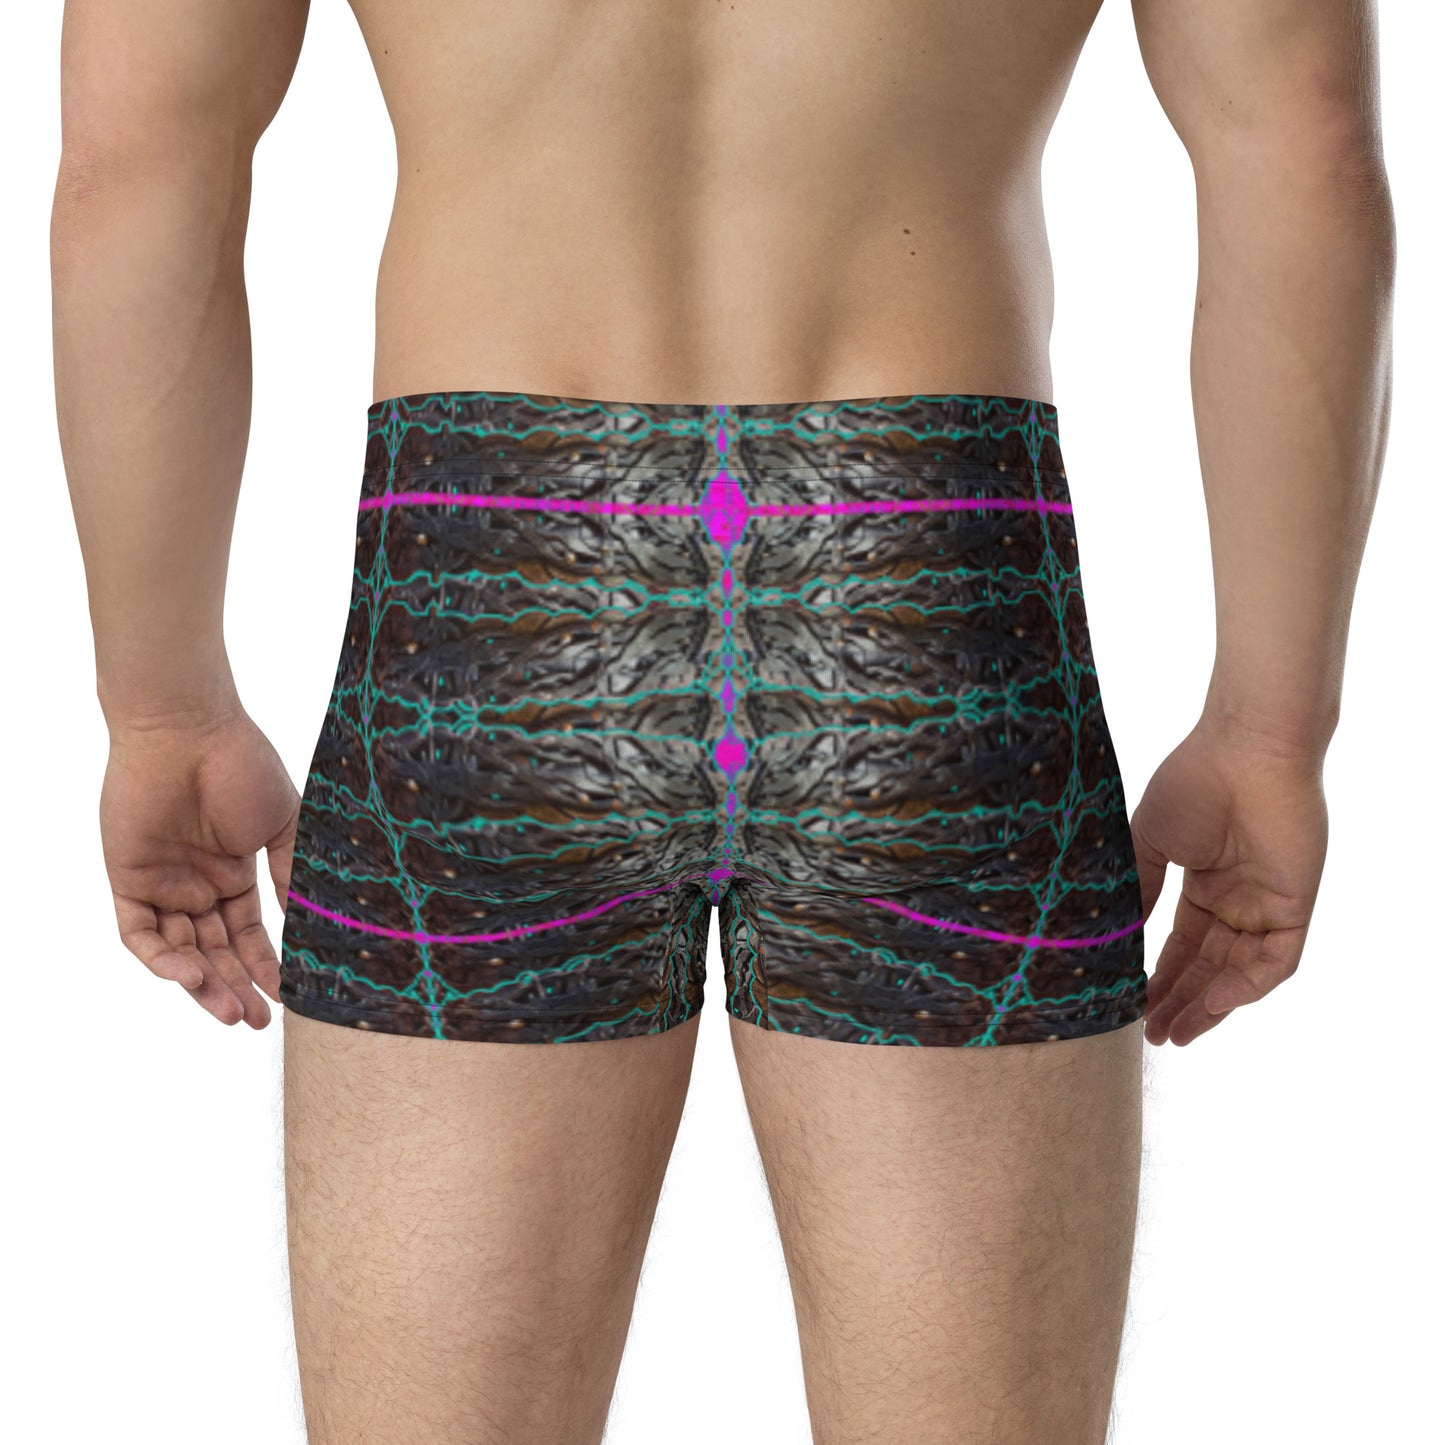 Boxer Briefs (His/They)(Rind#8 Tree Link ) RJSTH@Fabric#8 RJSTHW2021 RJS